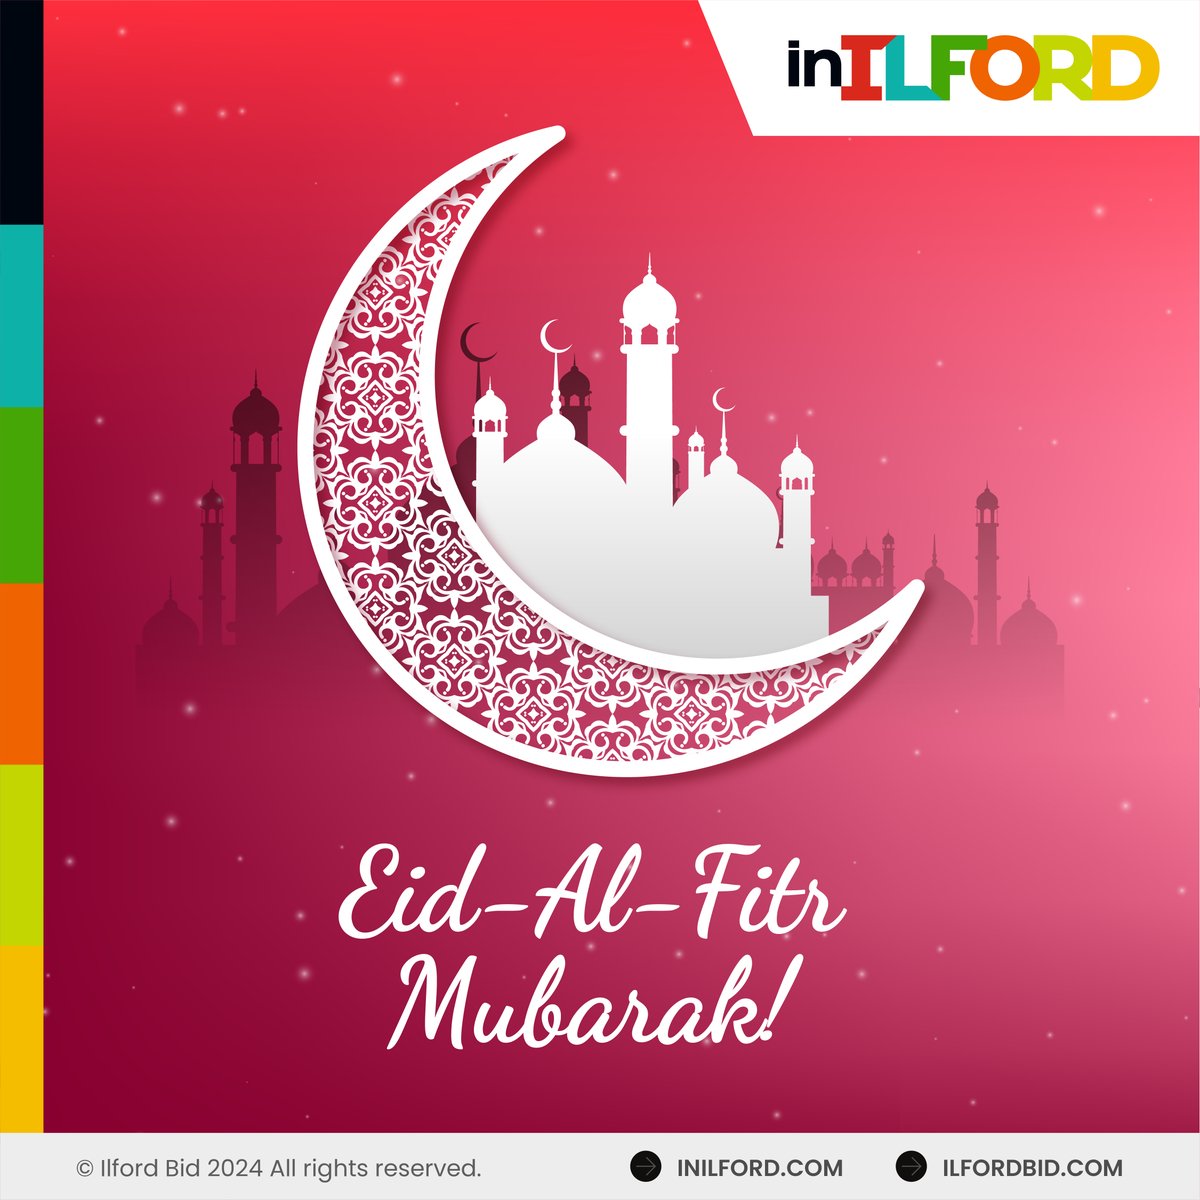 Enjoying Eid al-Fitr with loved ones, spreading joy and peace. Wishing you all happiness and blessings on this special day. Eid Mubarak! #EidMubarak #HappyEid #Celebration